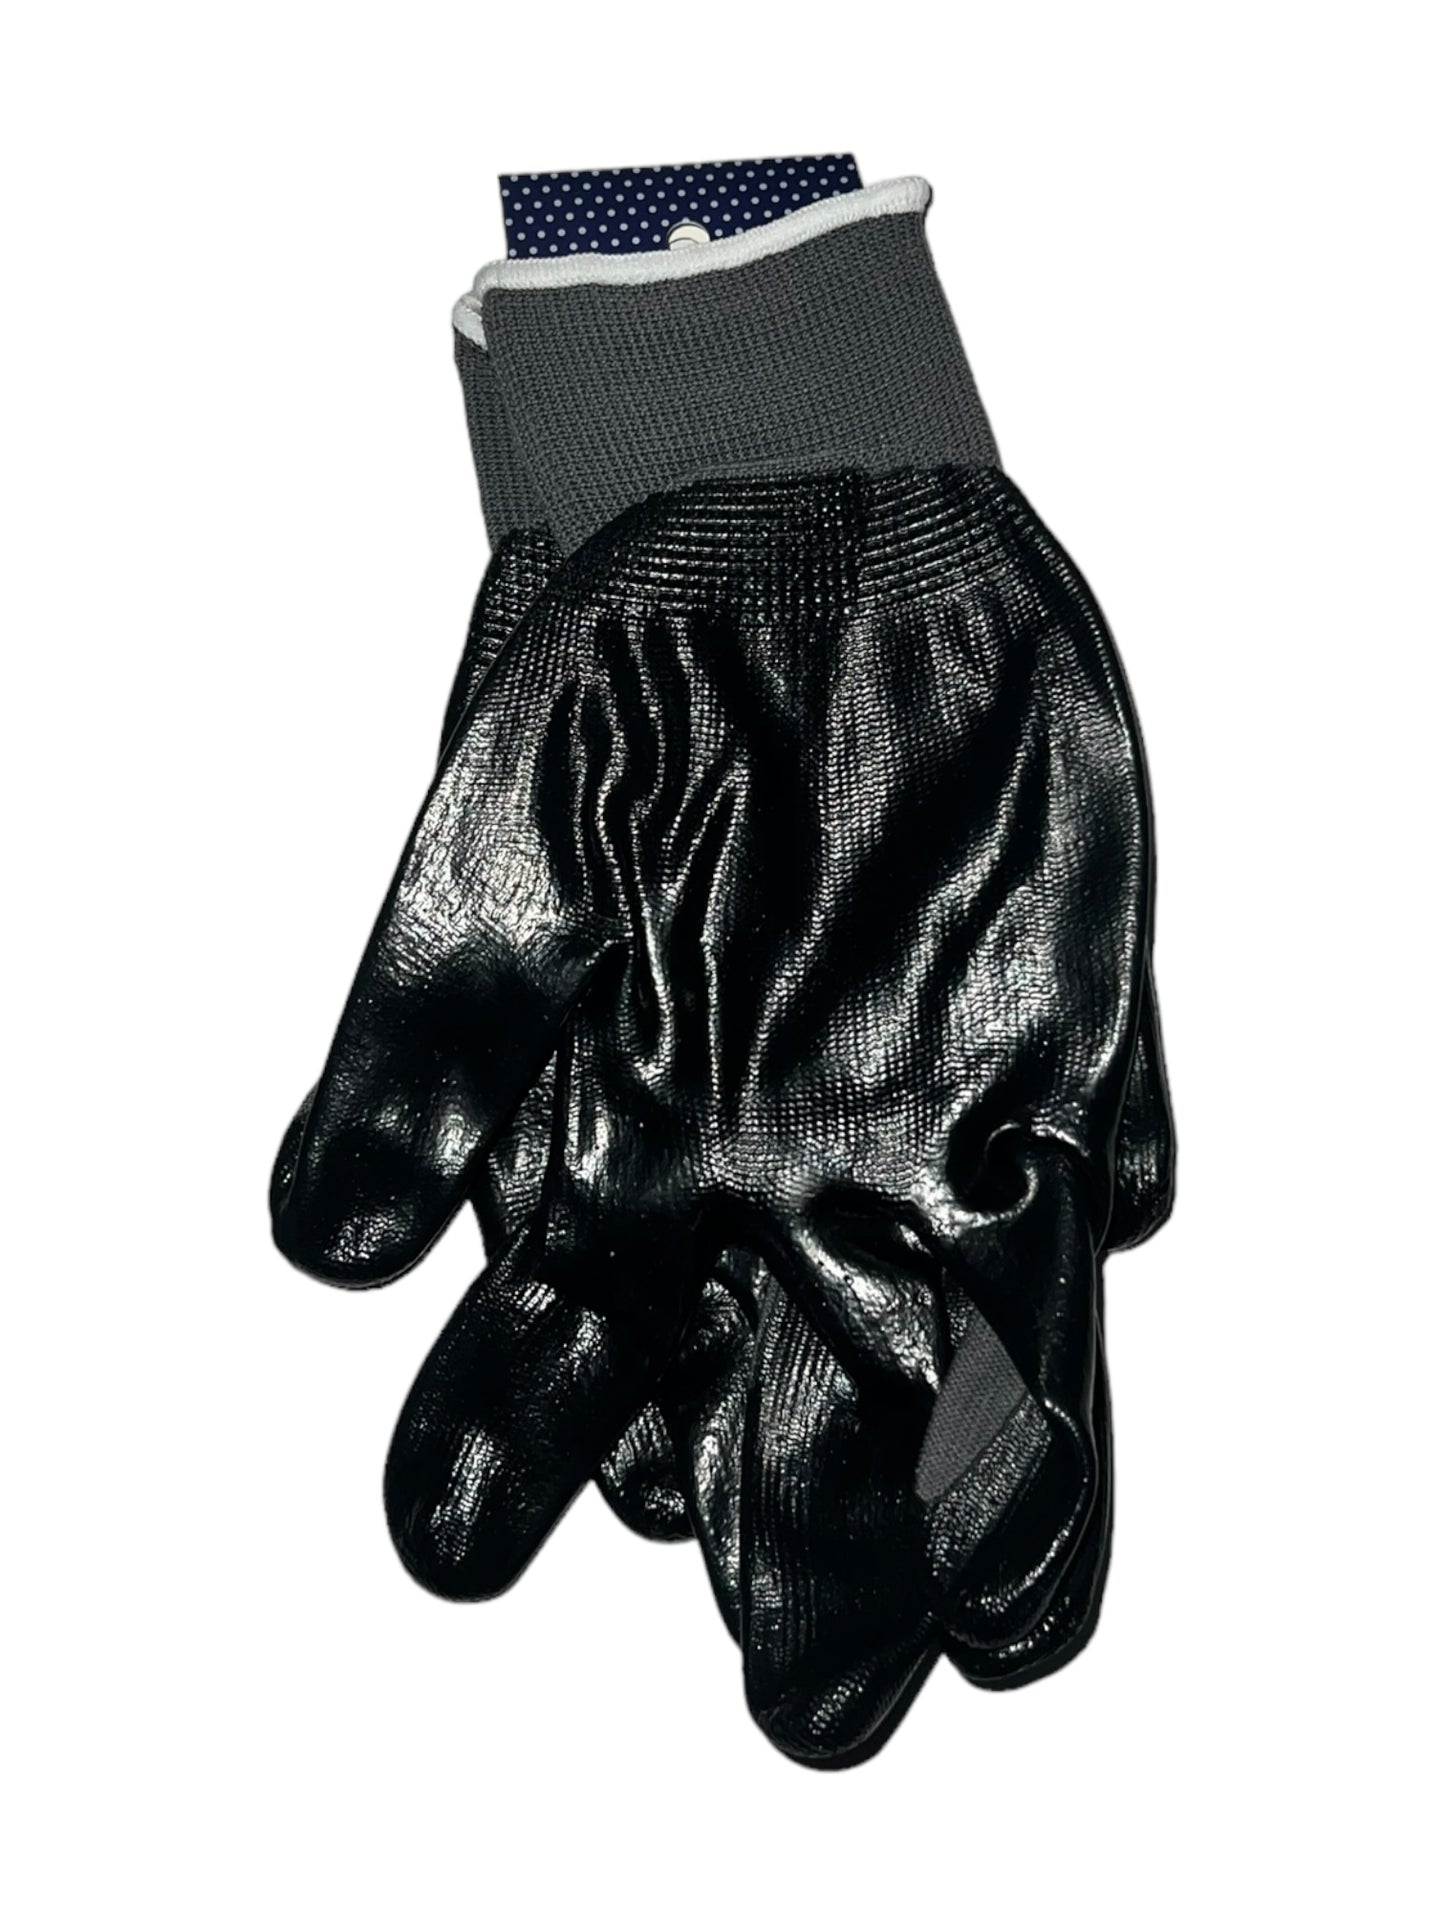 MG Large Deluxe Gloves 12-Pairs